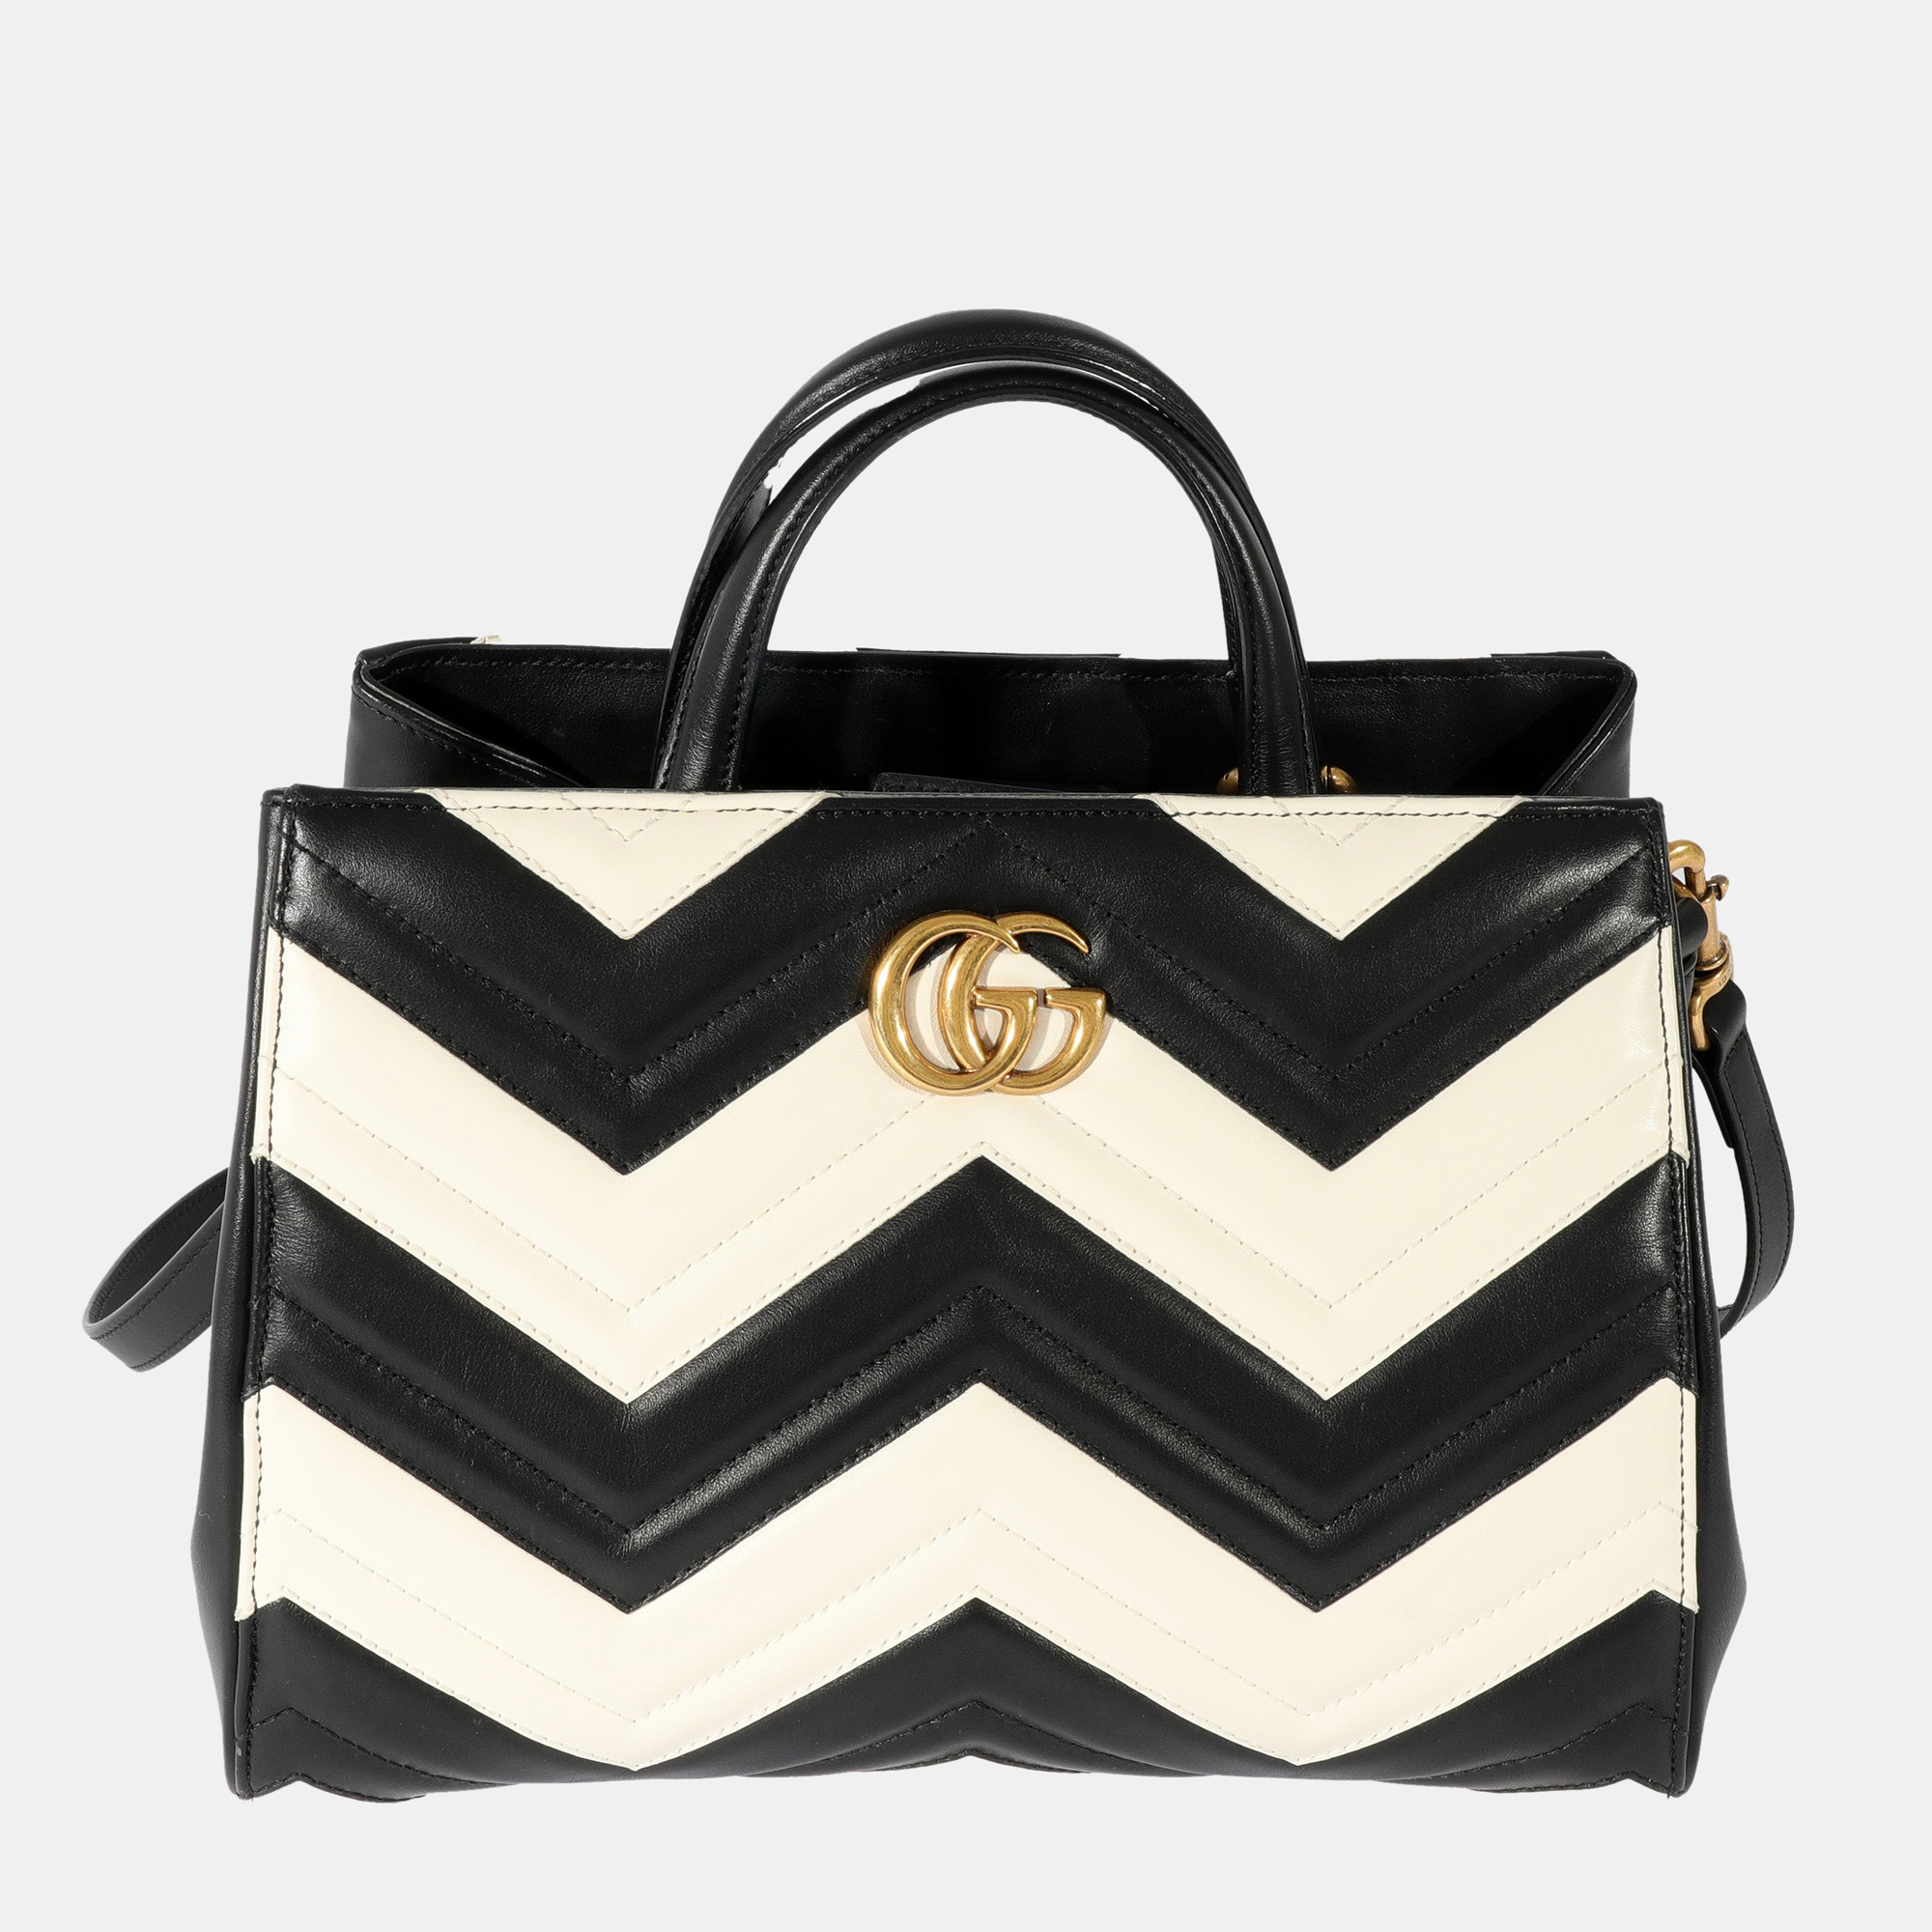 Pre-owned Gucci White Black Gg Marmont Top Handle Tote Bag